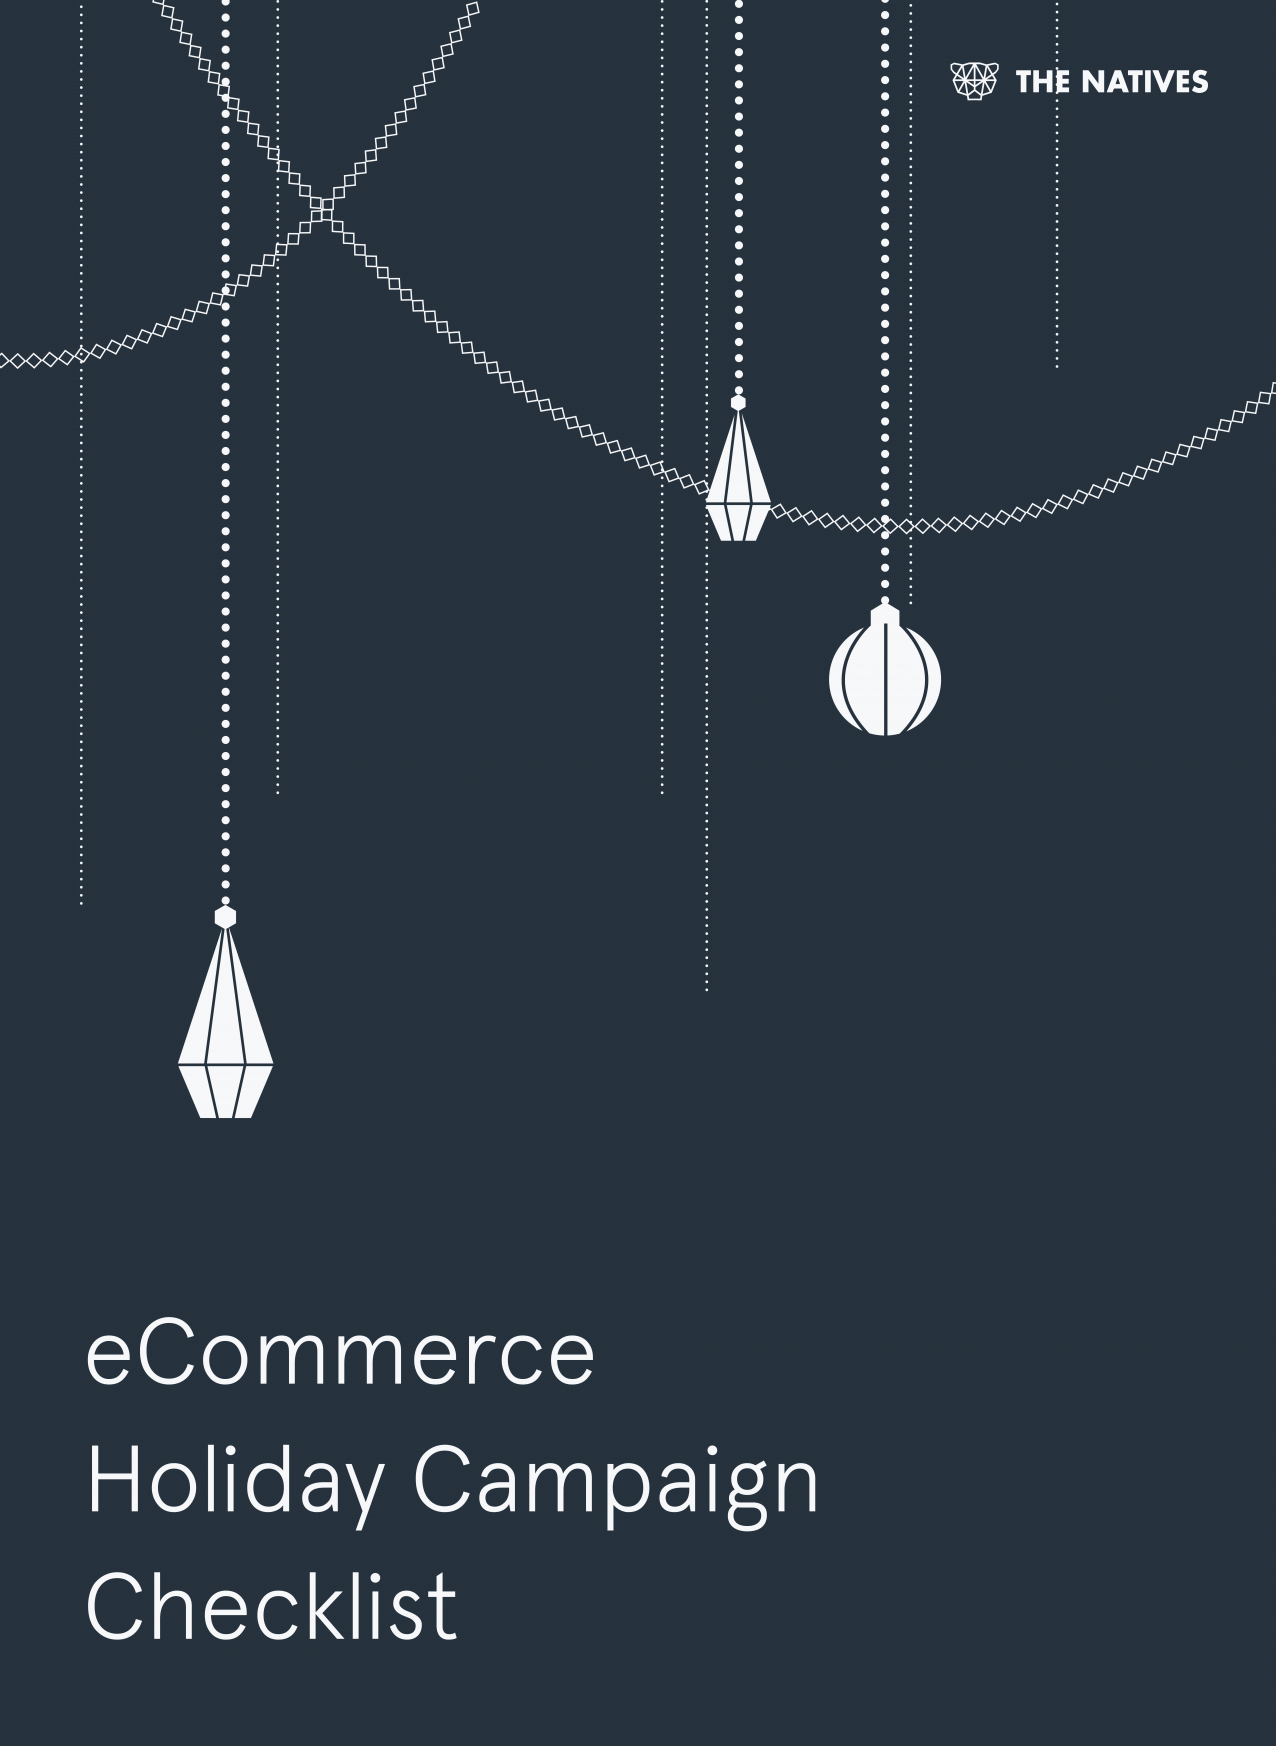 The eCommerce Holiday Campaign Checklist